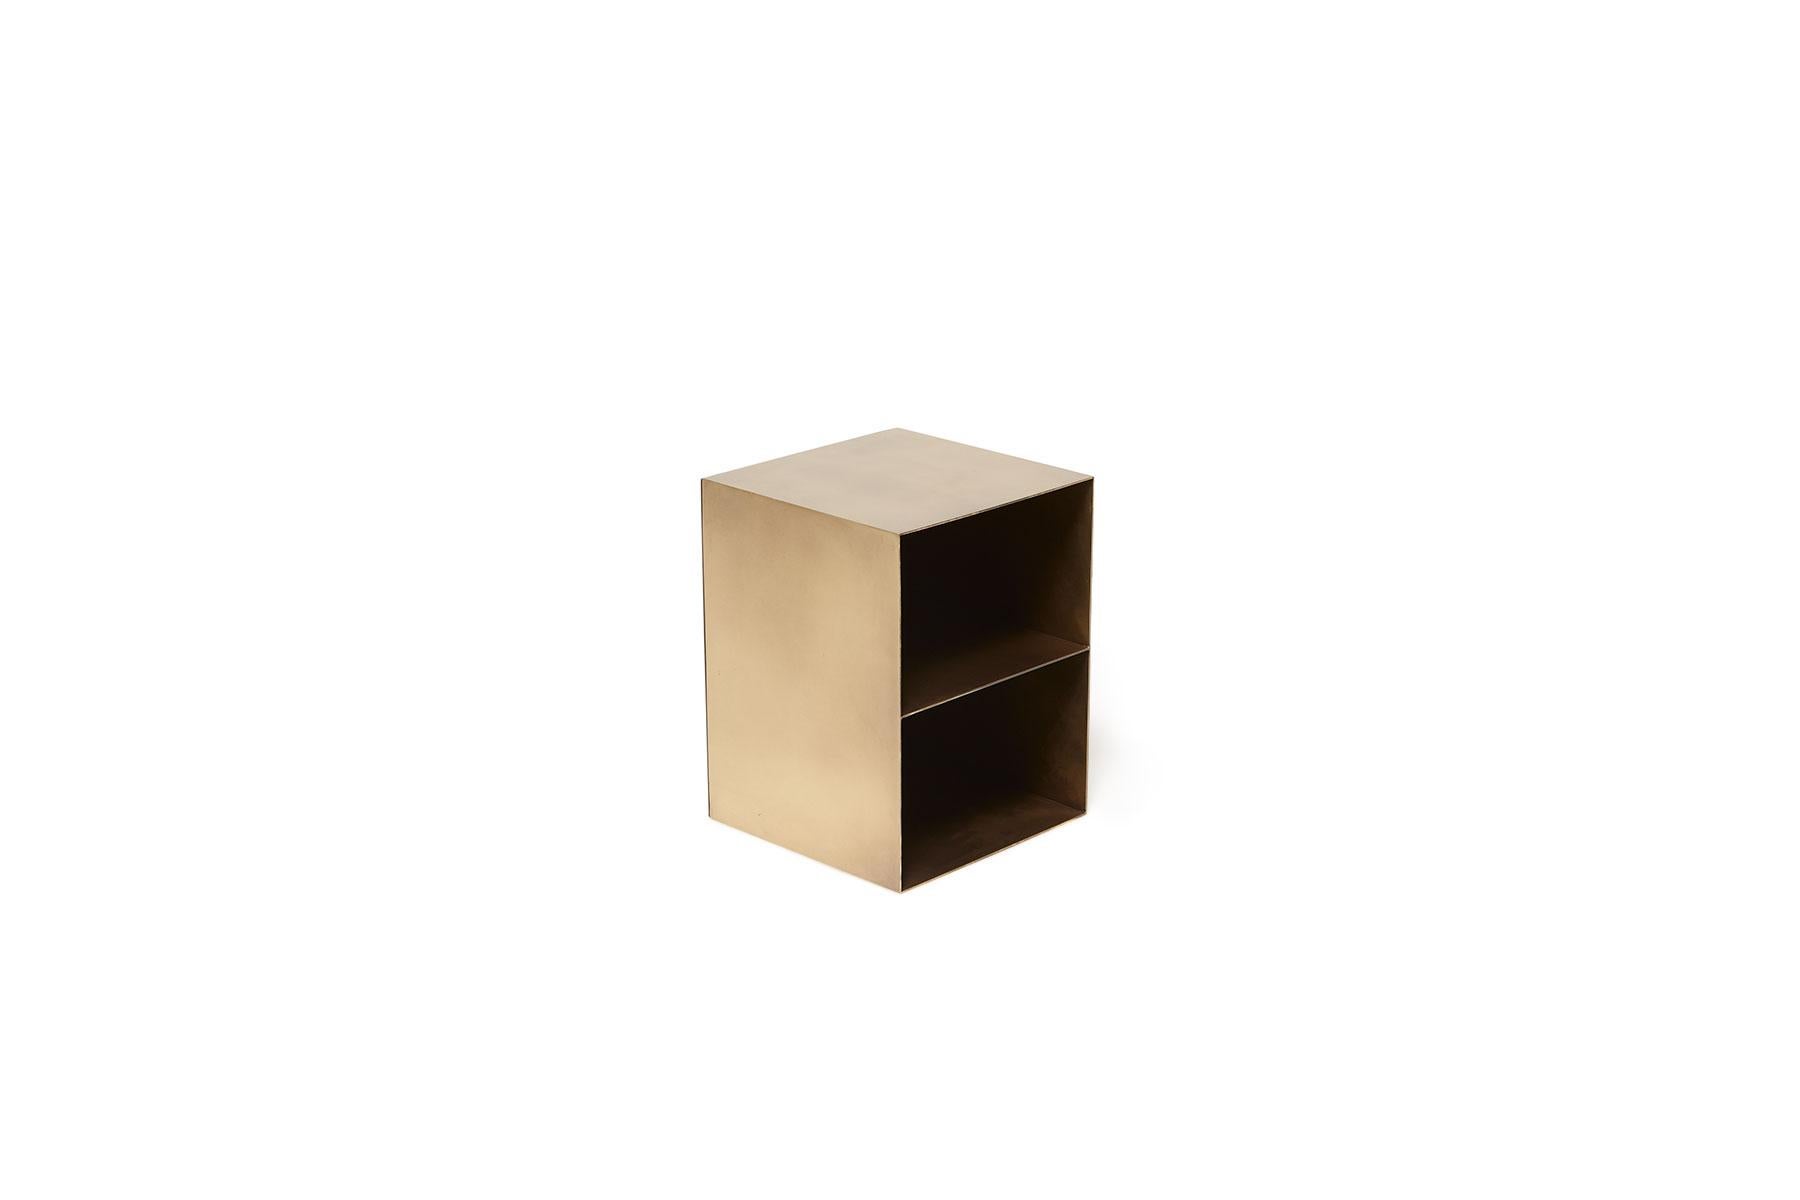 A modular stool and storage system created to accessorize a living space. Can be used facedown to act as stools or a small coffee table or turned upright to act as a small shelving or storage unit. Shown here in antique brass. Also available in